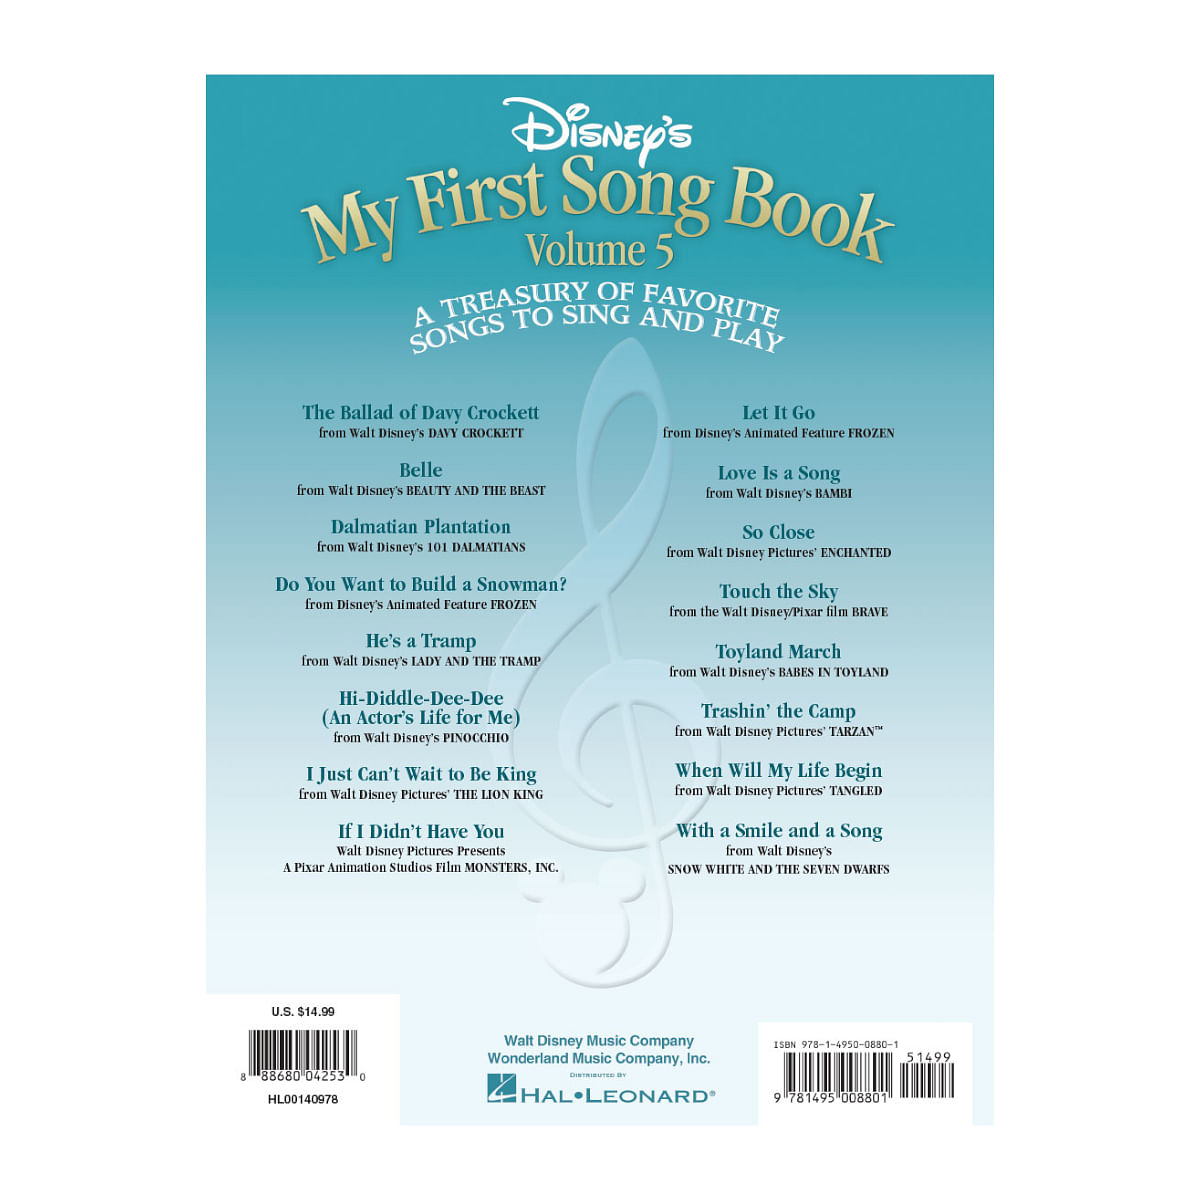 Disney's My First Song Book - A Treasury of Favorite Songs to Sing